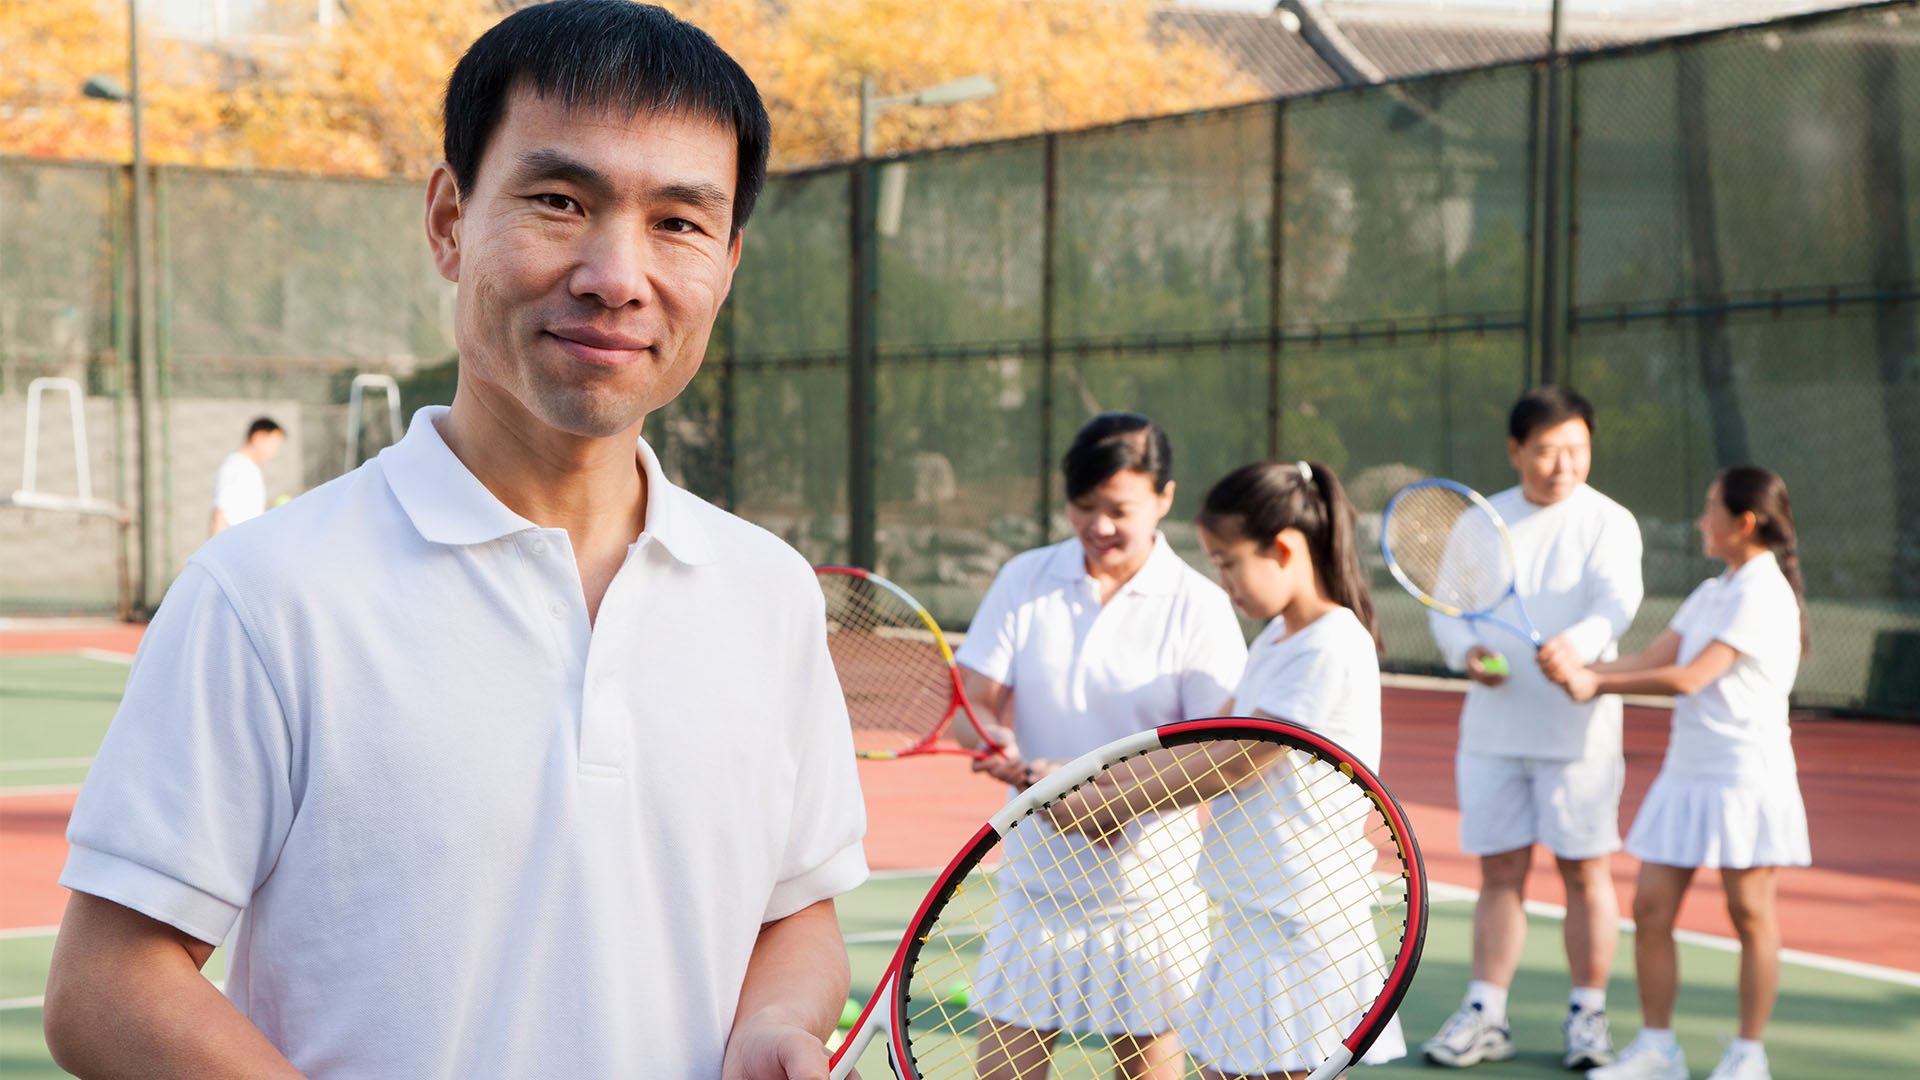 Coaching male and female tennis players